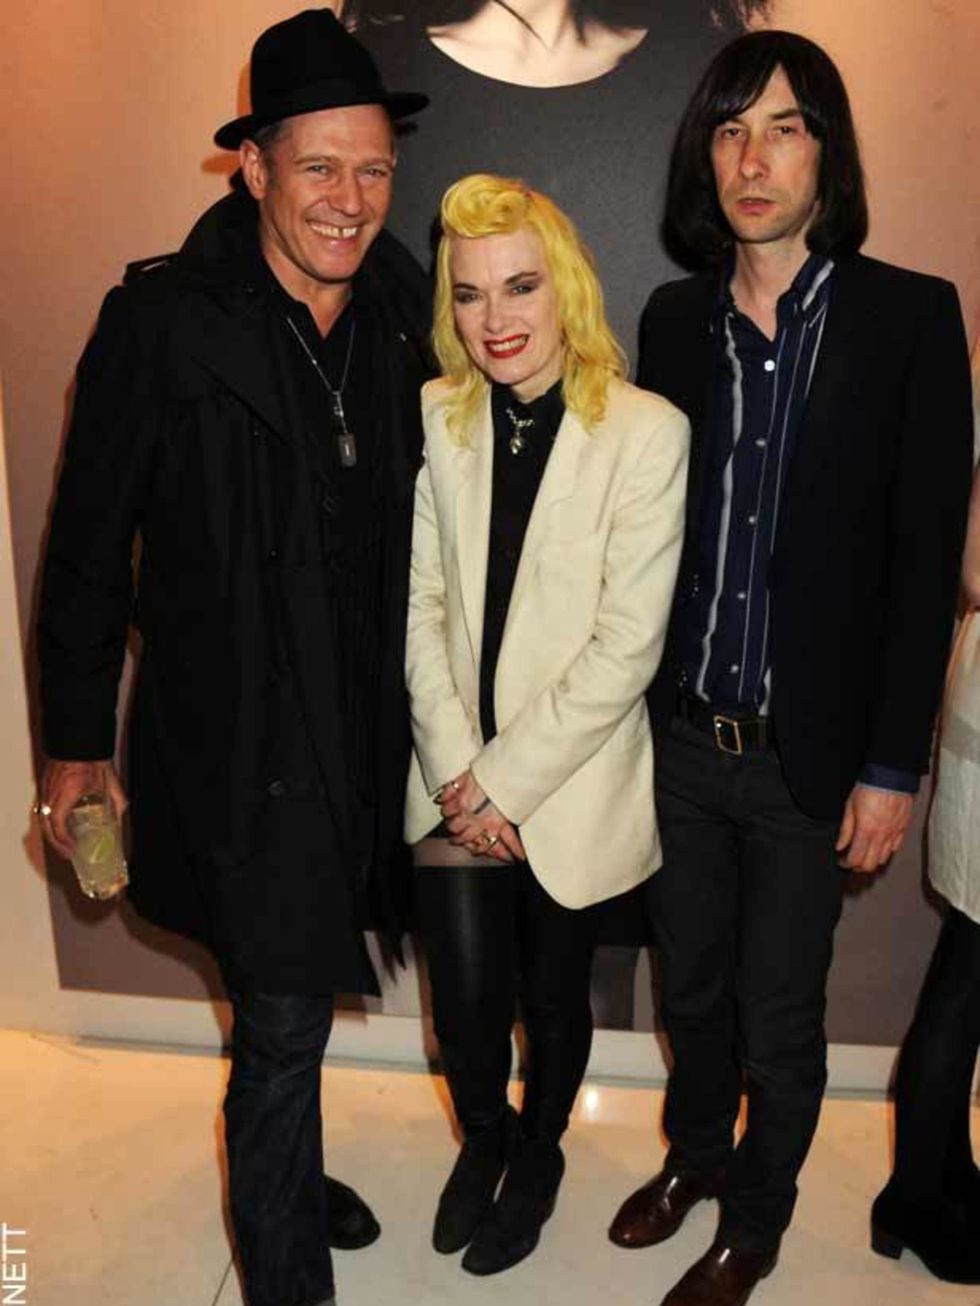 <p>Paul Simonon, <a href="http://www.elleuk.com/starstyle/special-features/(section)/w-london-calling-party/(offset)/6/(img)/757679">Pam Hogg</a> &amp; Bobby Gillisepe at the Mother of Pearl Pop Up Shop party in London, 12th April, 2011</p>